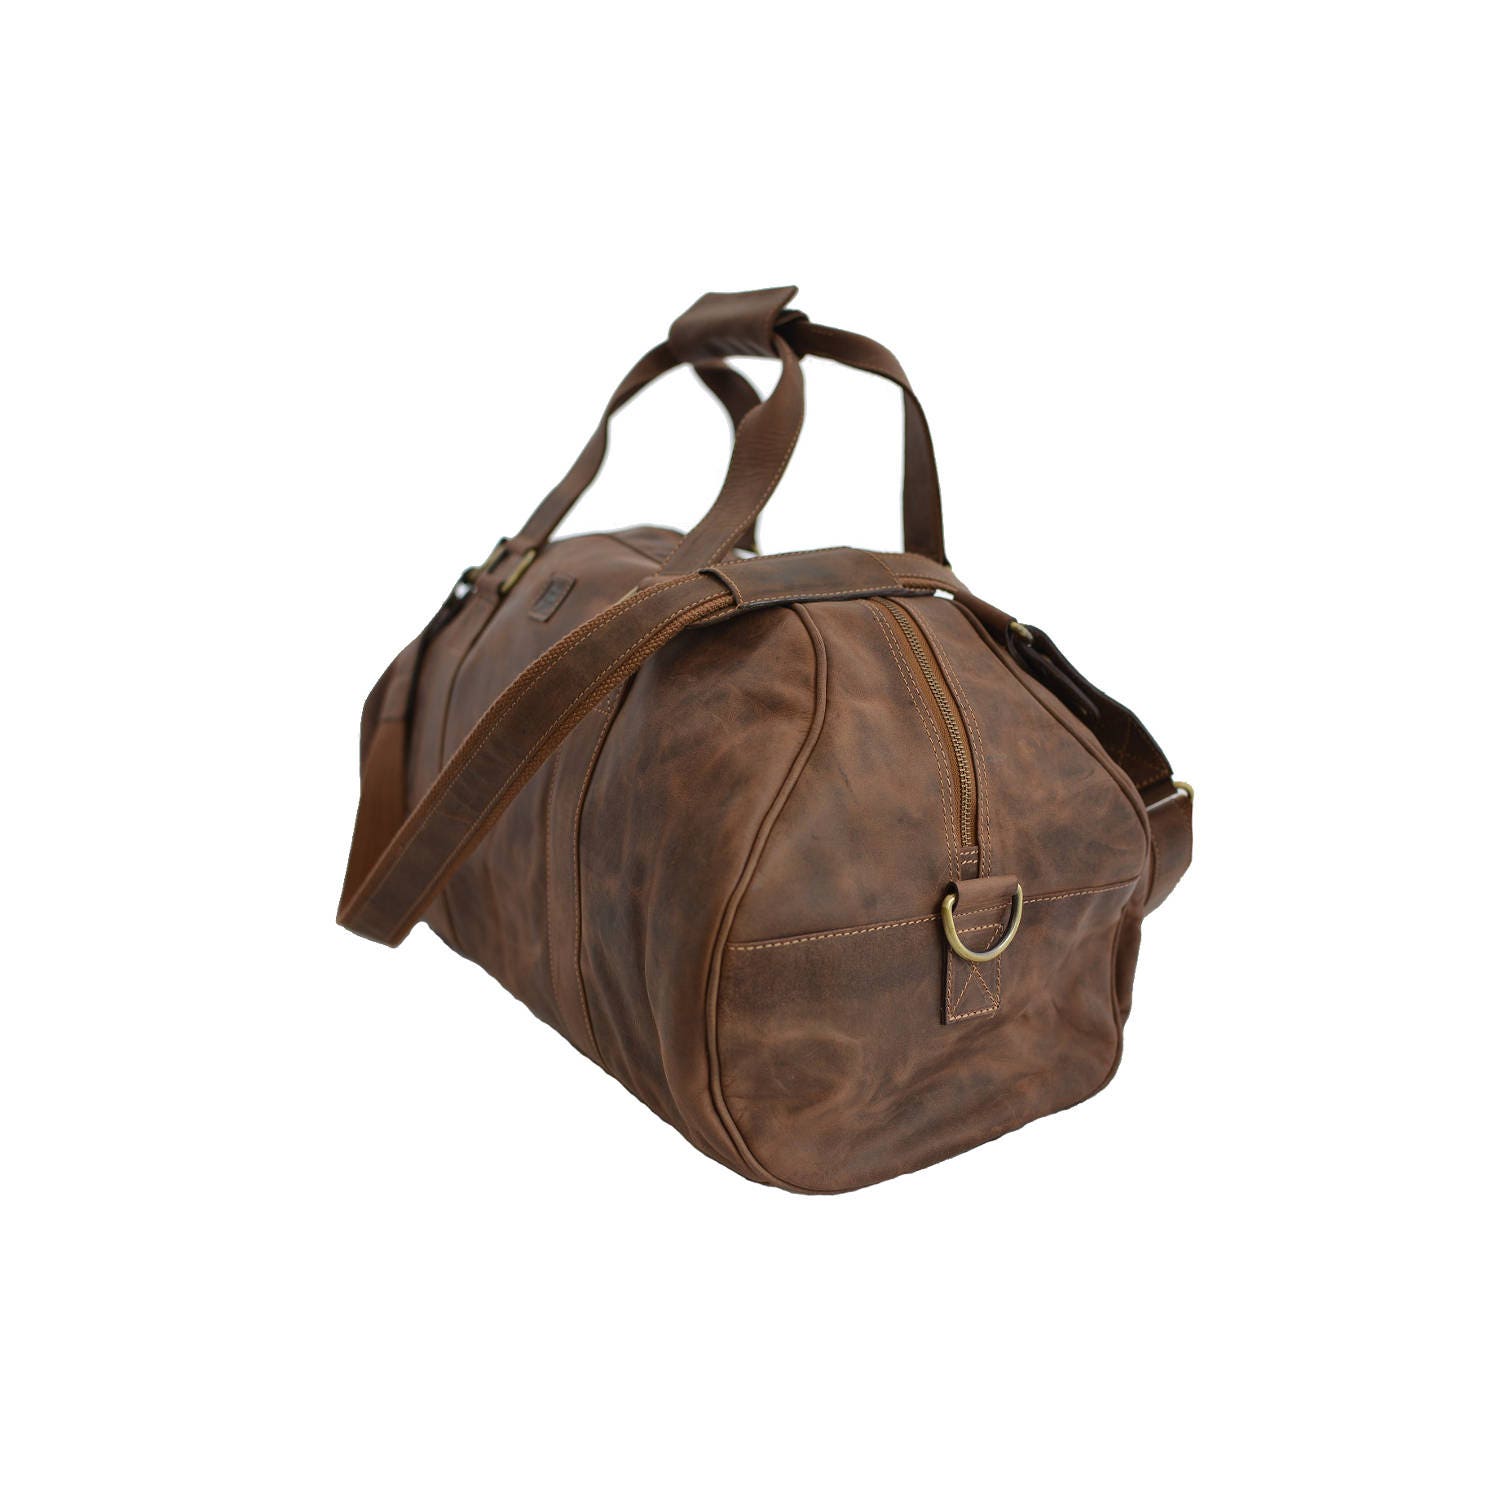 22 Inch Duffle Bag / Overnight Bag / Weekend Bag / Carry on 